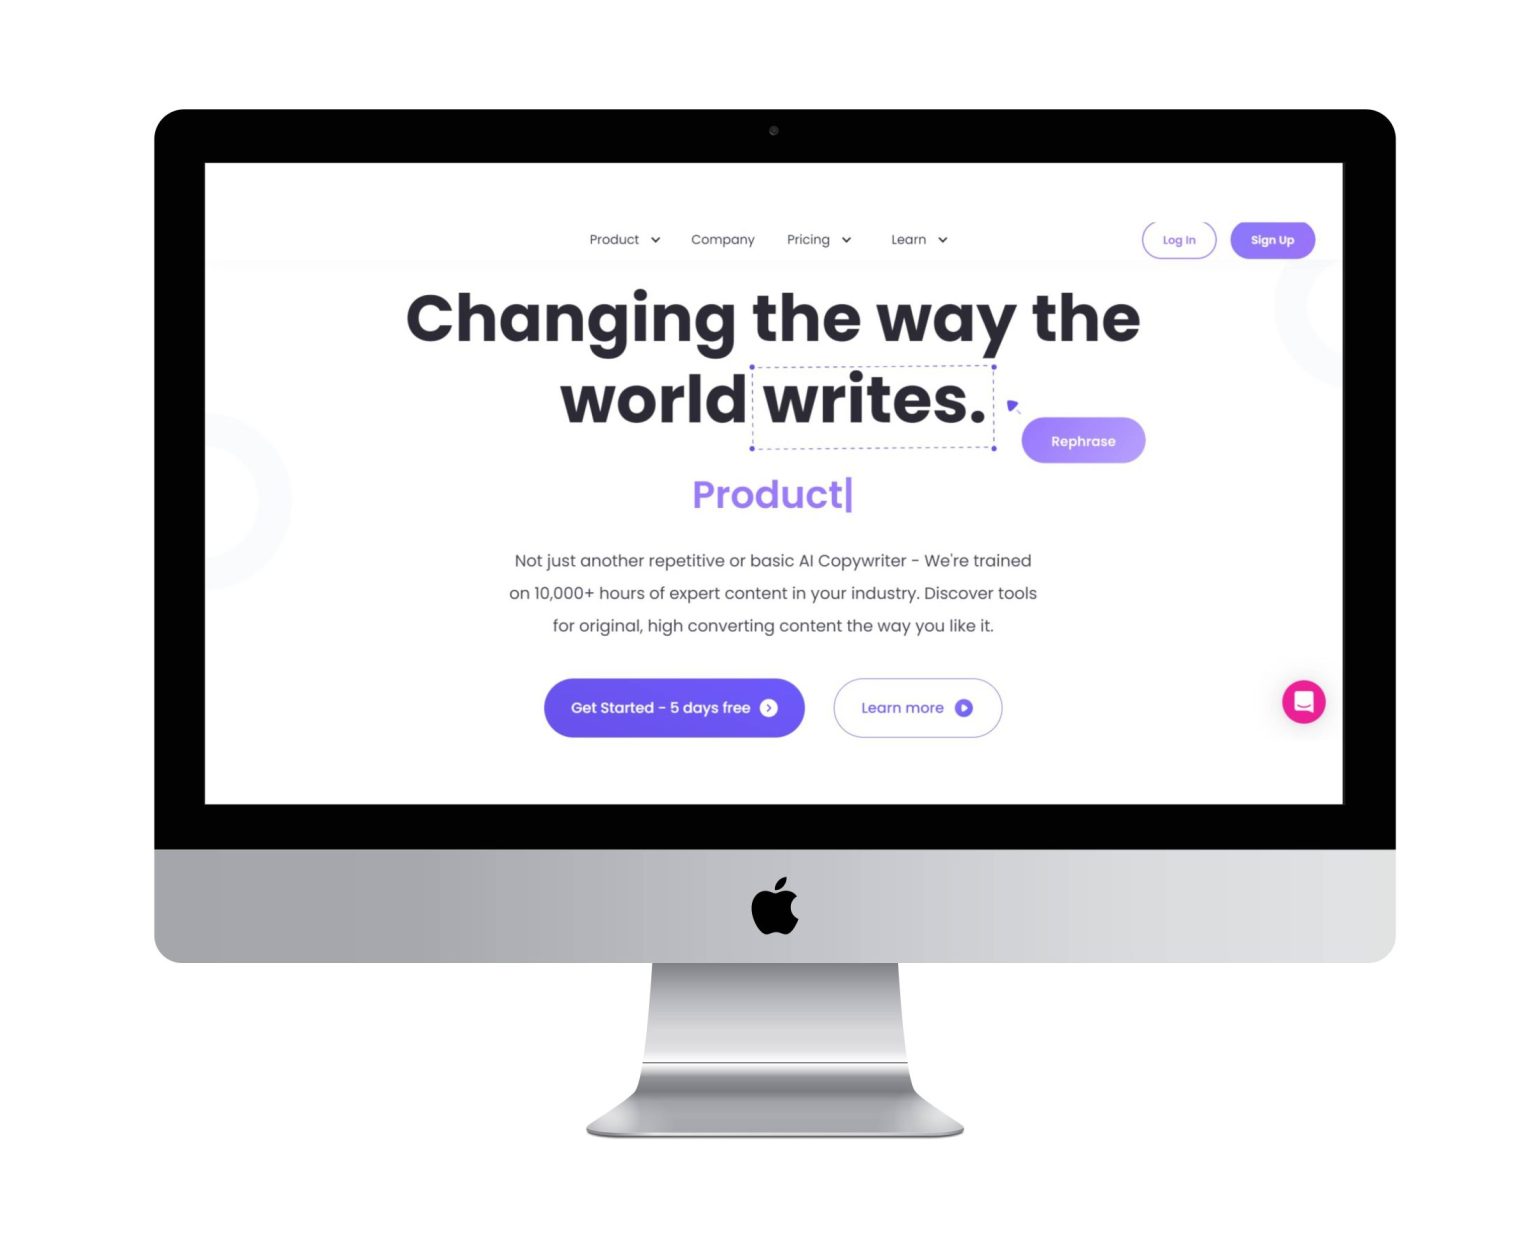 A portfolio image showcasing the AI copywriting solution, featuring an intuitive interface with text editing tools and AI-generated content examples.